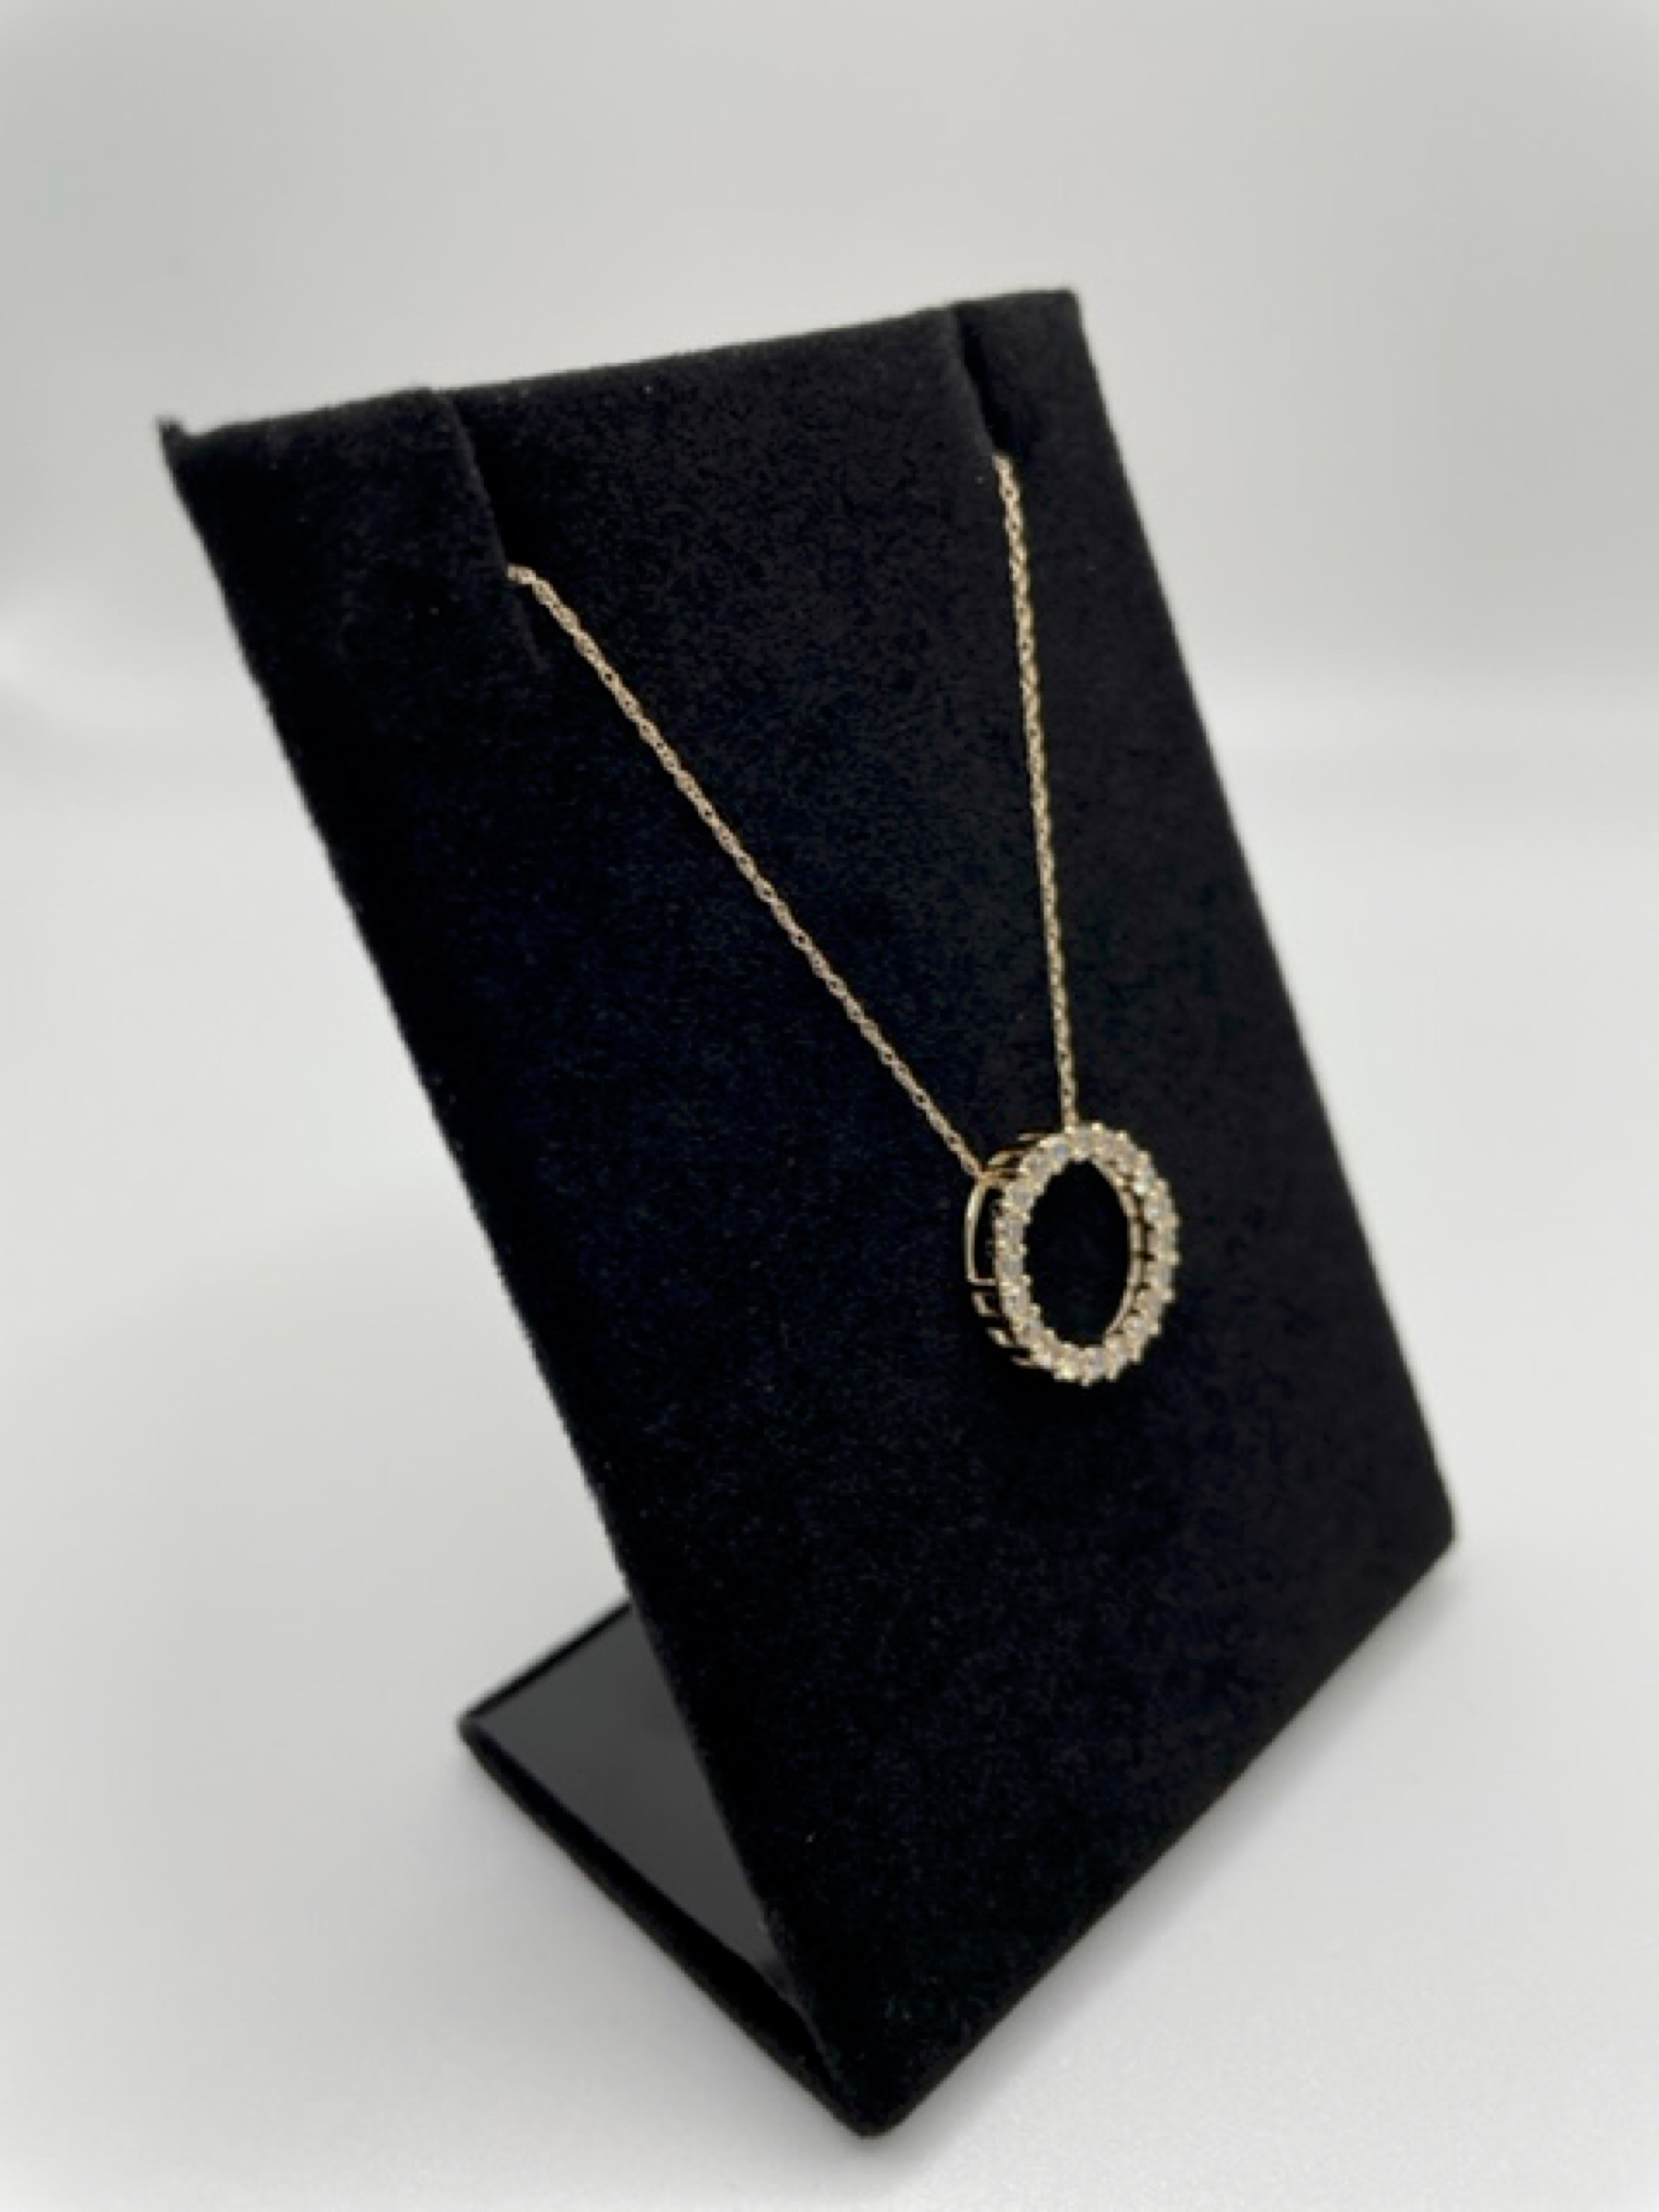 14 Karat Yellow Gold Diamond Necklace
Diamond Weight 0.50ct
Color: HI and Clarity: SI2-I1
Chain Length 18 inches
Comes with a lovely jewelry box